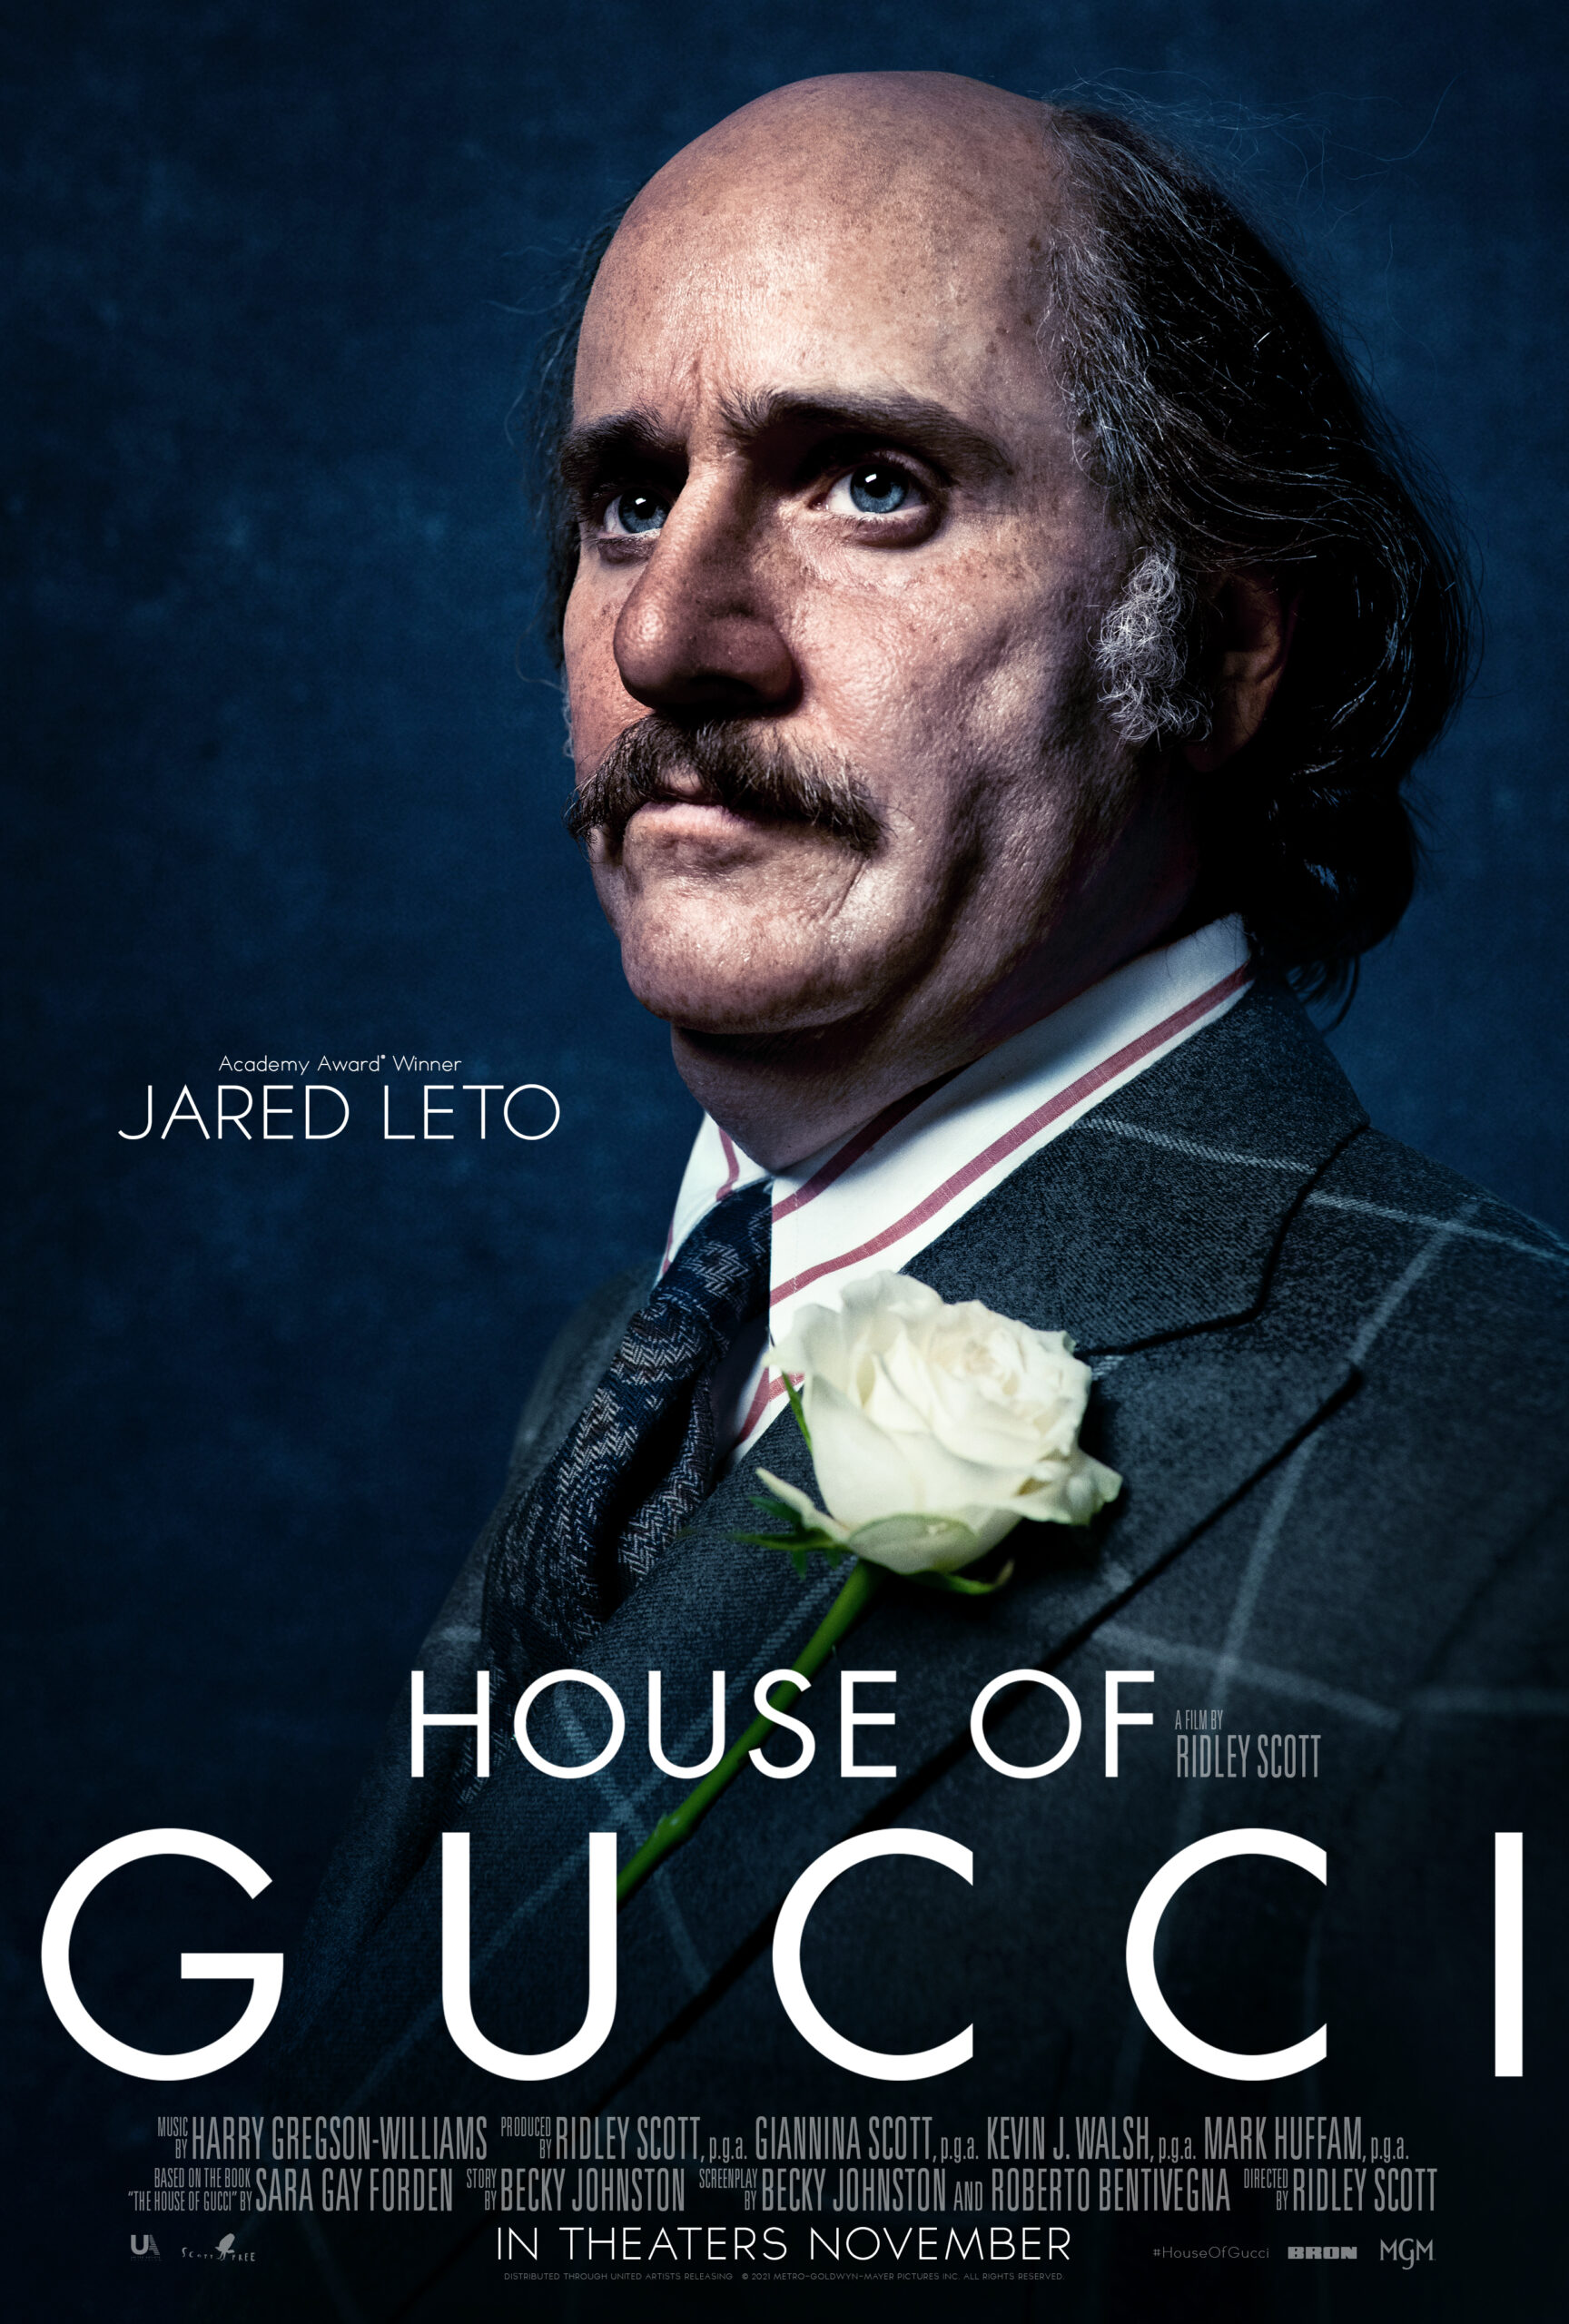 House of Gucci, trailer, Jared Leto, Ridley Scott